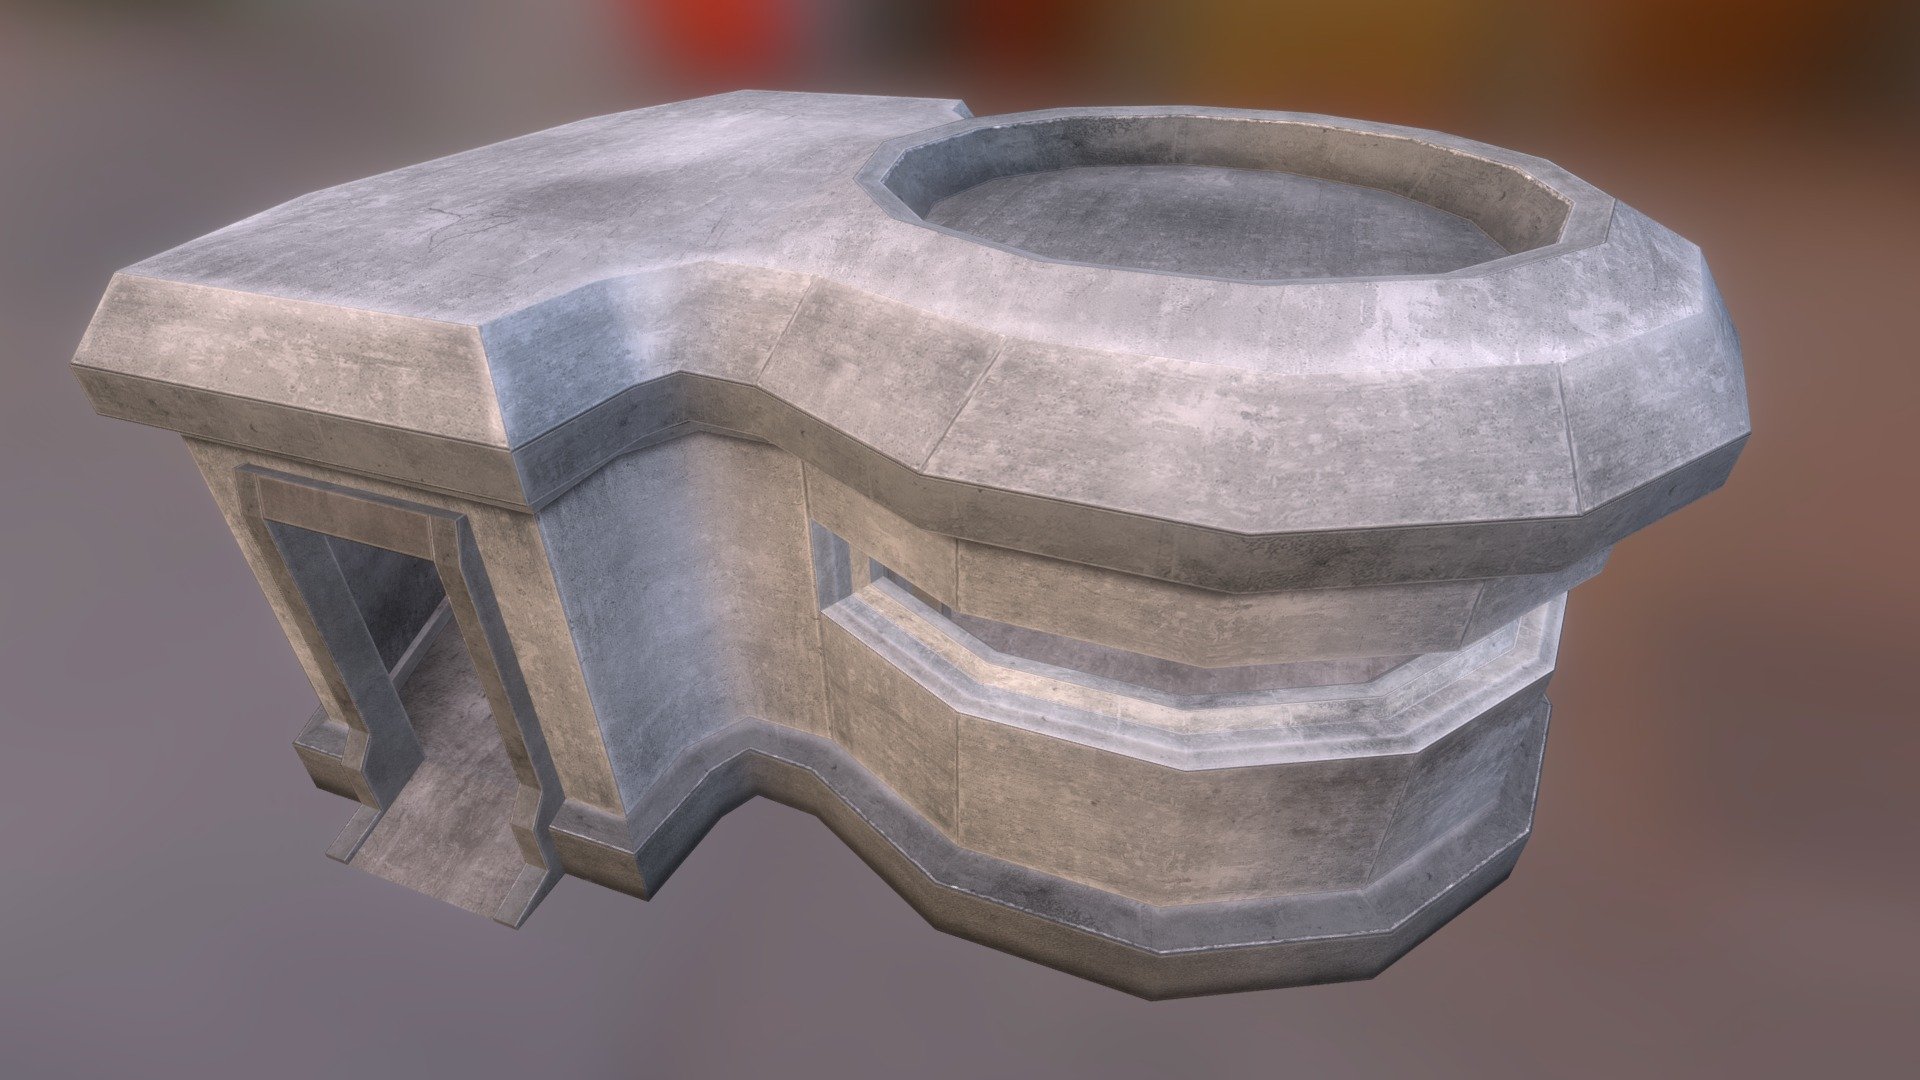 Concrete Bunker 04  Very Detailed  and Low Poly Concrete Bunker, great for any game such as FPS, Third Person, etc. The bunker can be entered, and will give the player a great pont of view, and good cover.  Bunker is inspired by the concrete bunkers used within World War II  Poly's - 626  Vert's - 628  ##Purchase &amp; Download ##29 $ - Concrete Bunker 04 - 3D model by GamePoly (@triix3d) 3d model